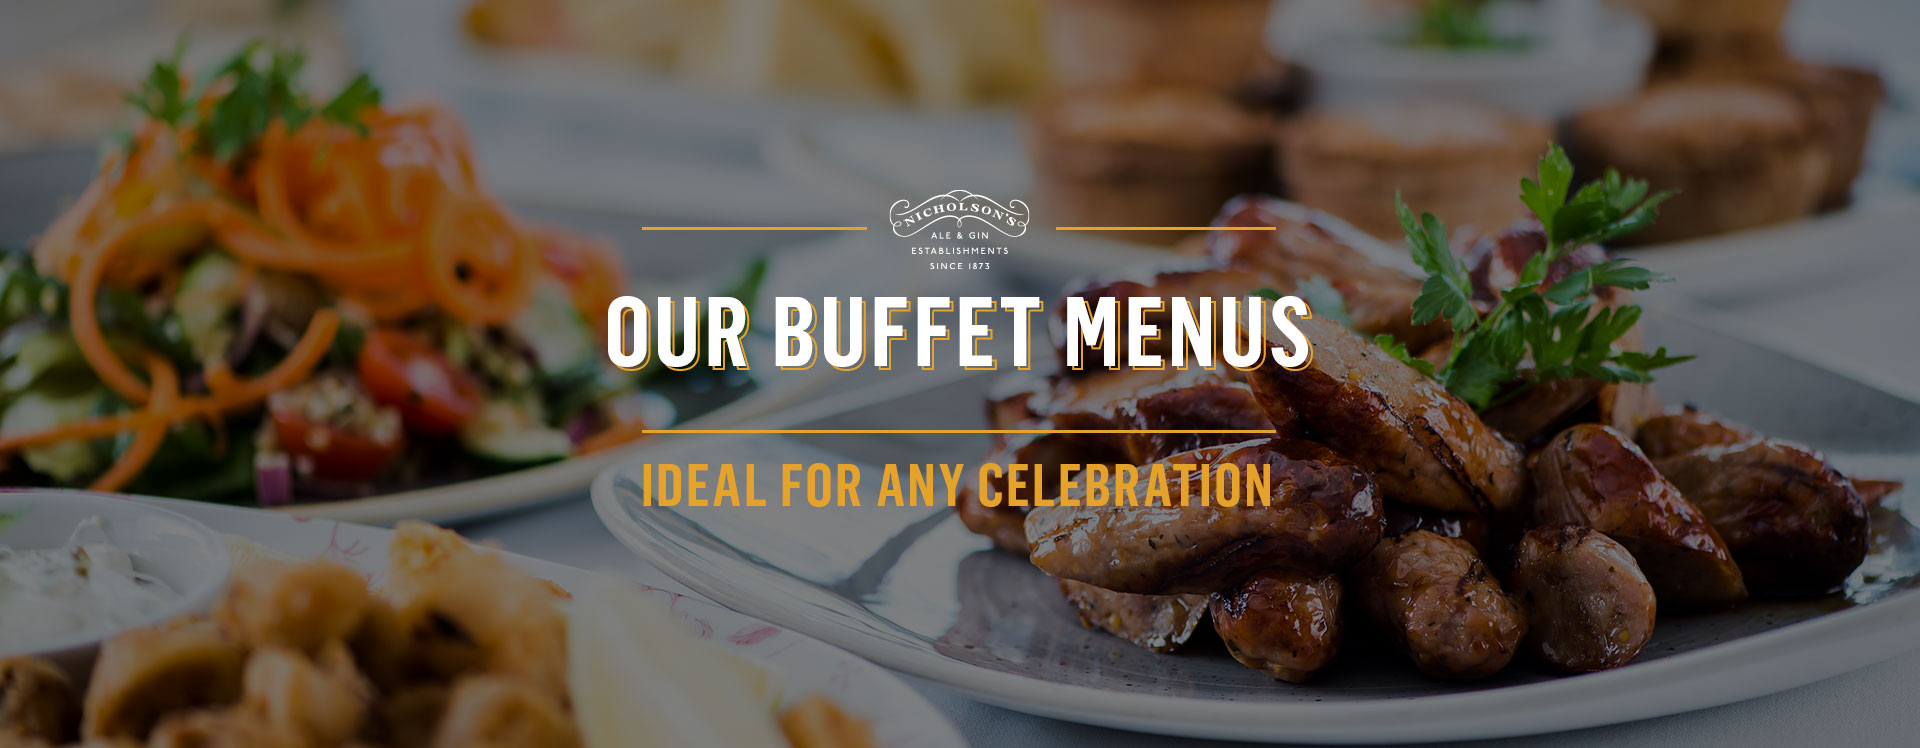 Buffet menu at The Walrus and The Carpenter - Book a table